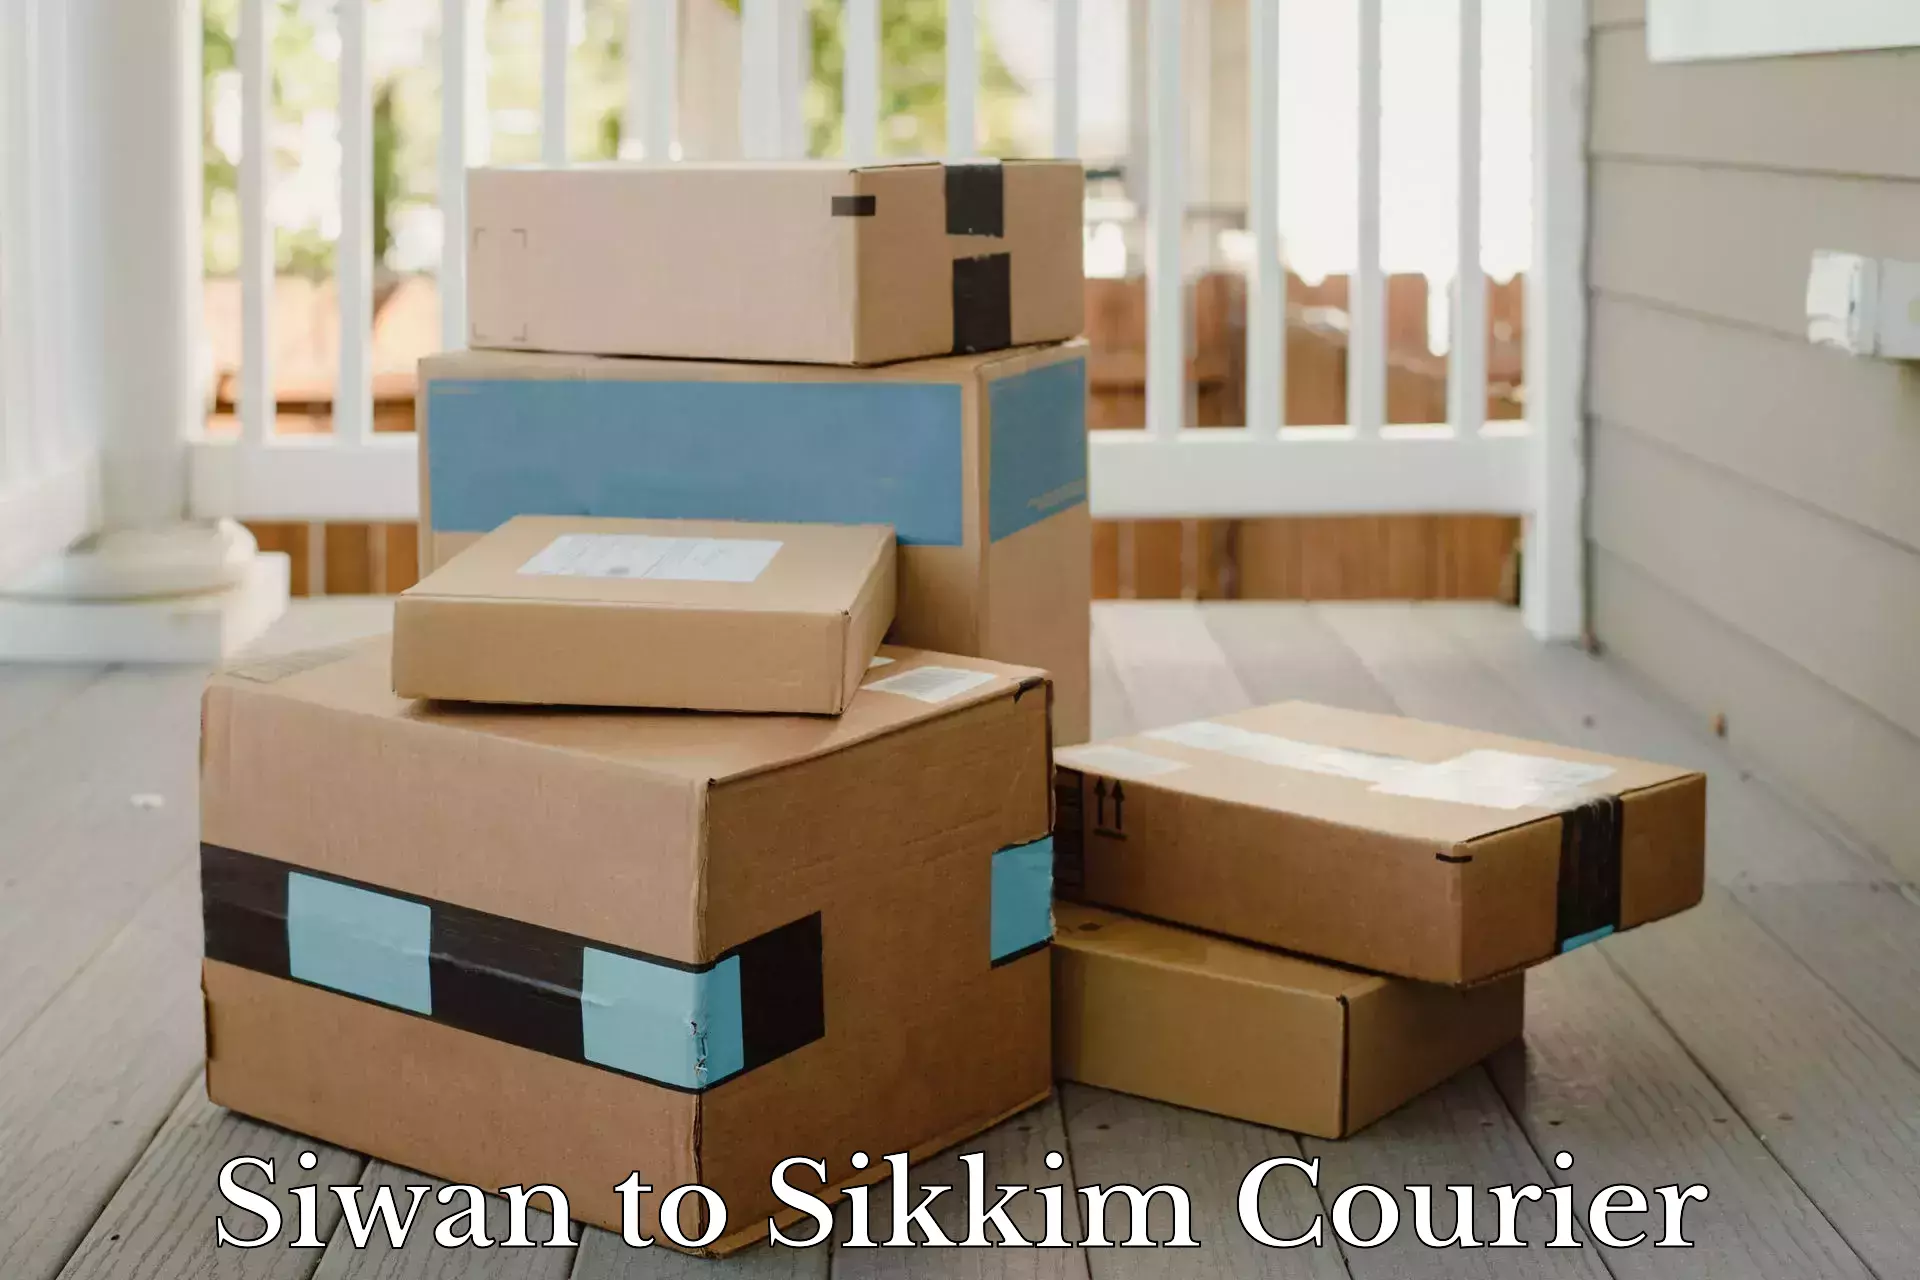 On-call courier service Siwan to North Sikkim